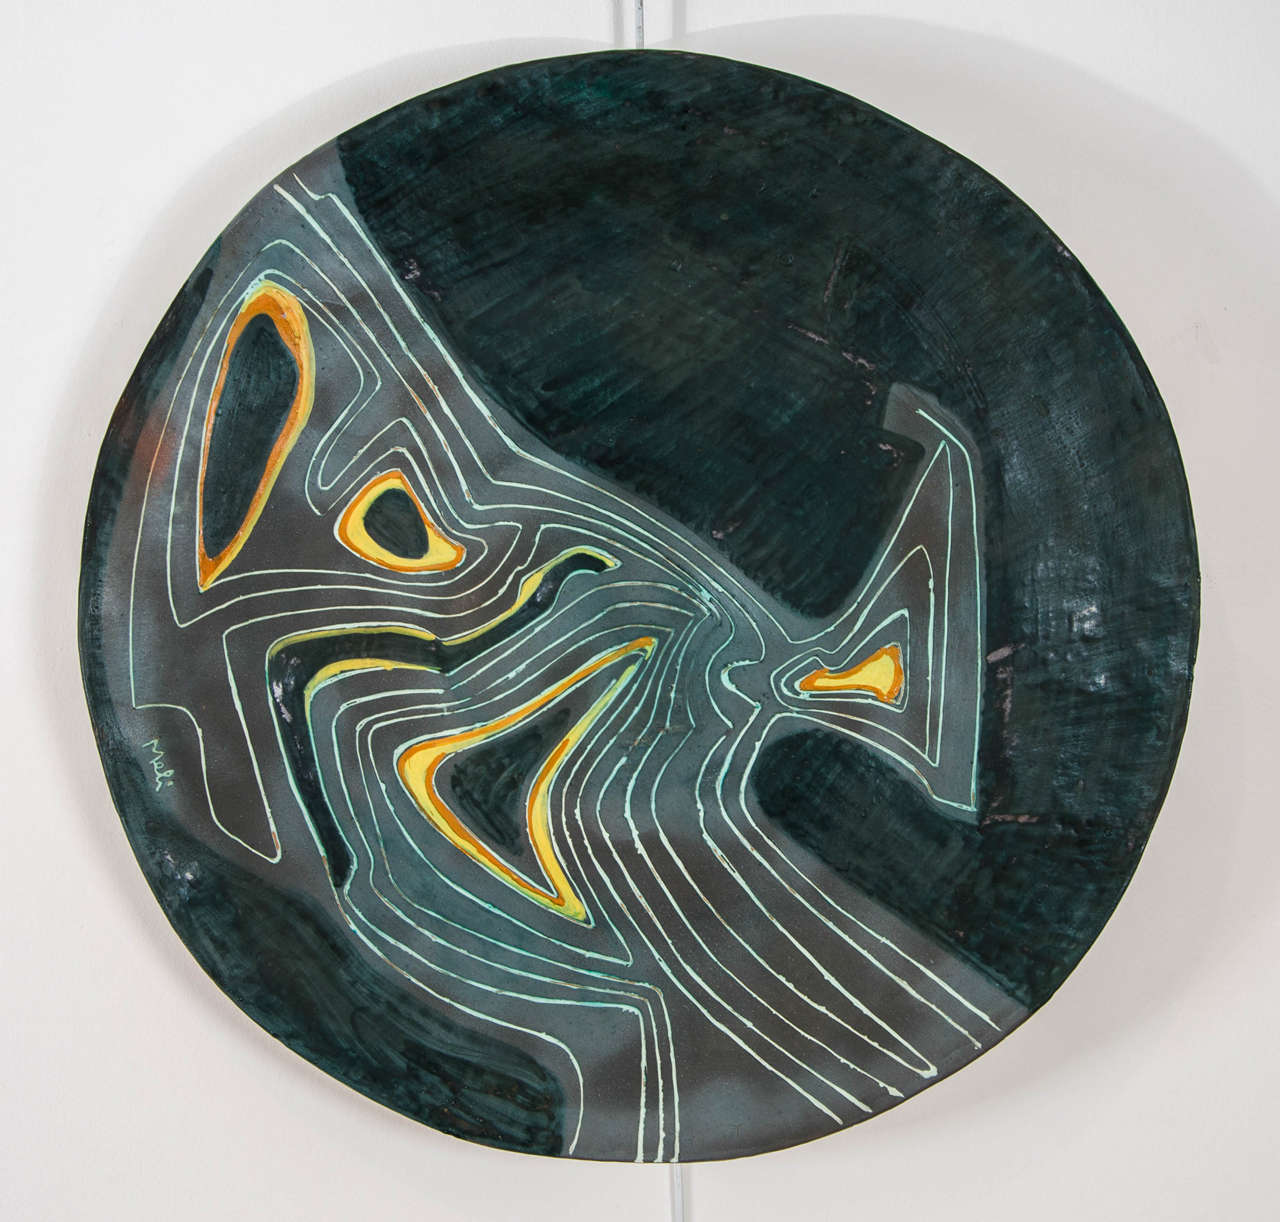 Large and impressive charger with abstract linear pattern on a green ground
Signed 'Meli'.